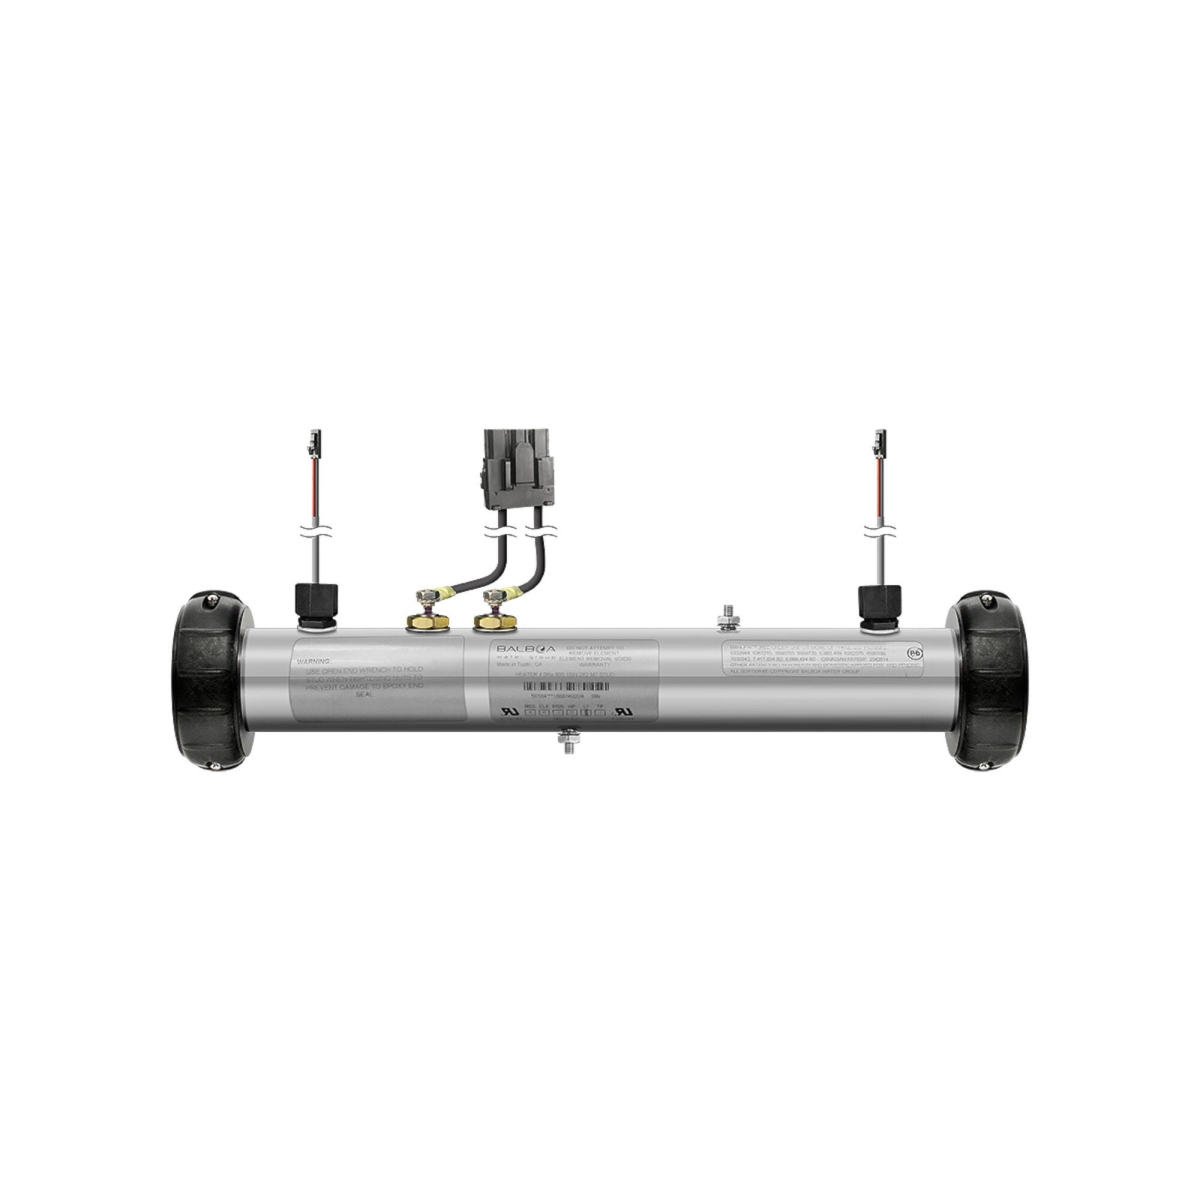 Picture of Balboa G7418 4.0kW Flo-Thru Heater Assembly with 2.0 Pressure Switch & Temp Sensor